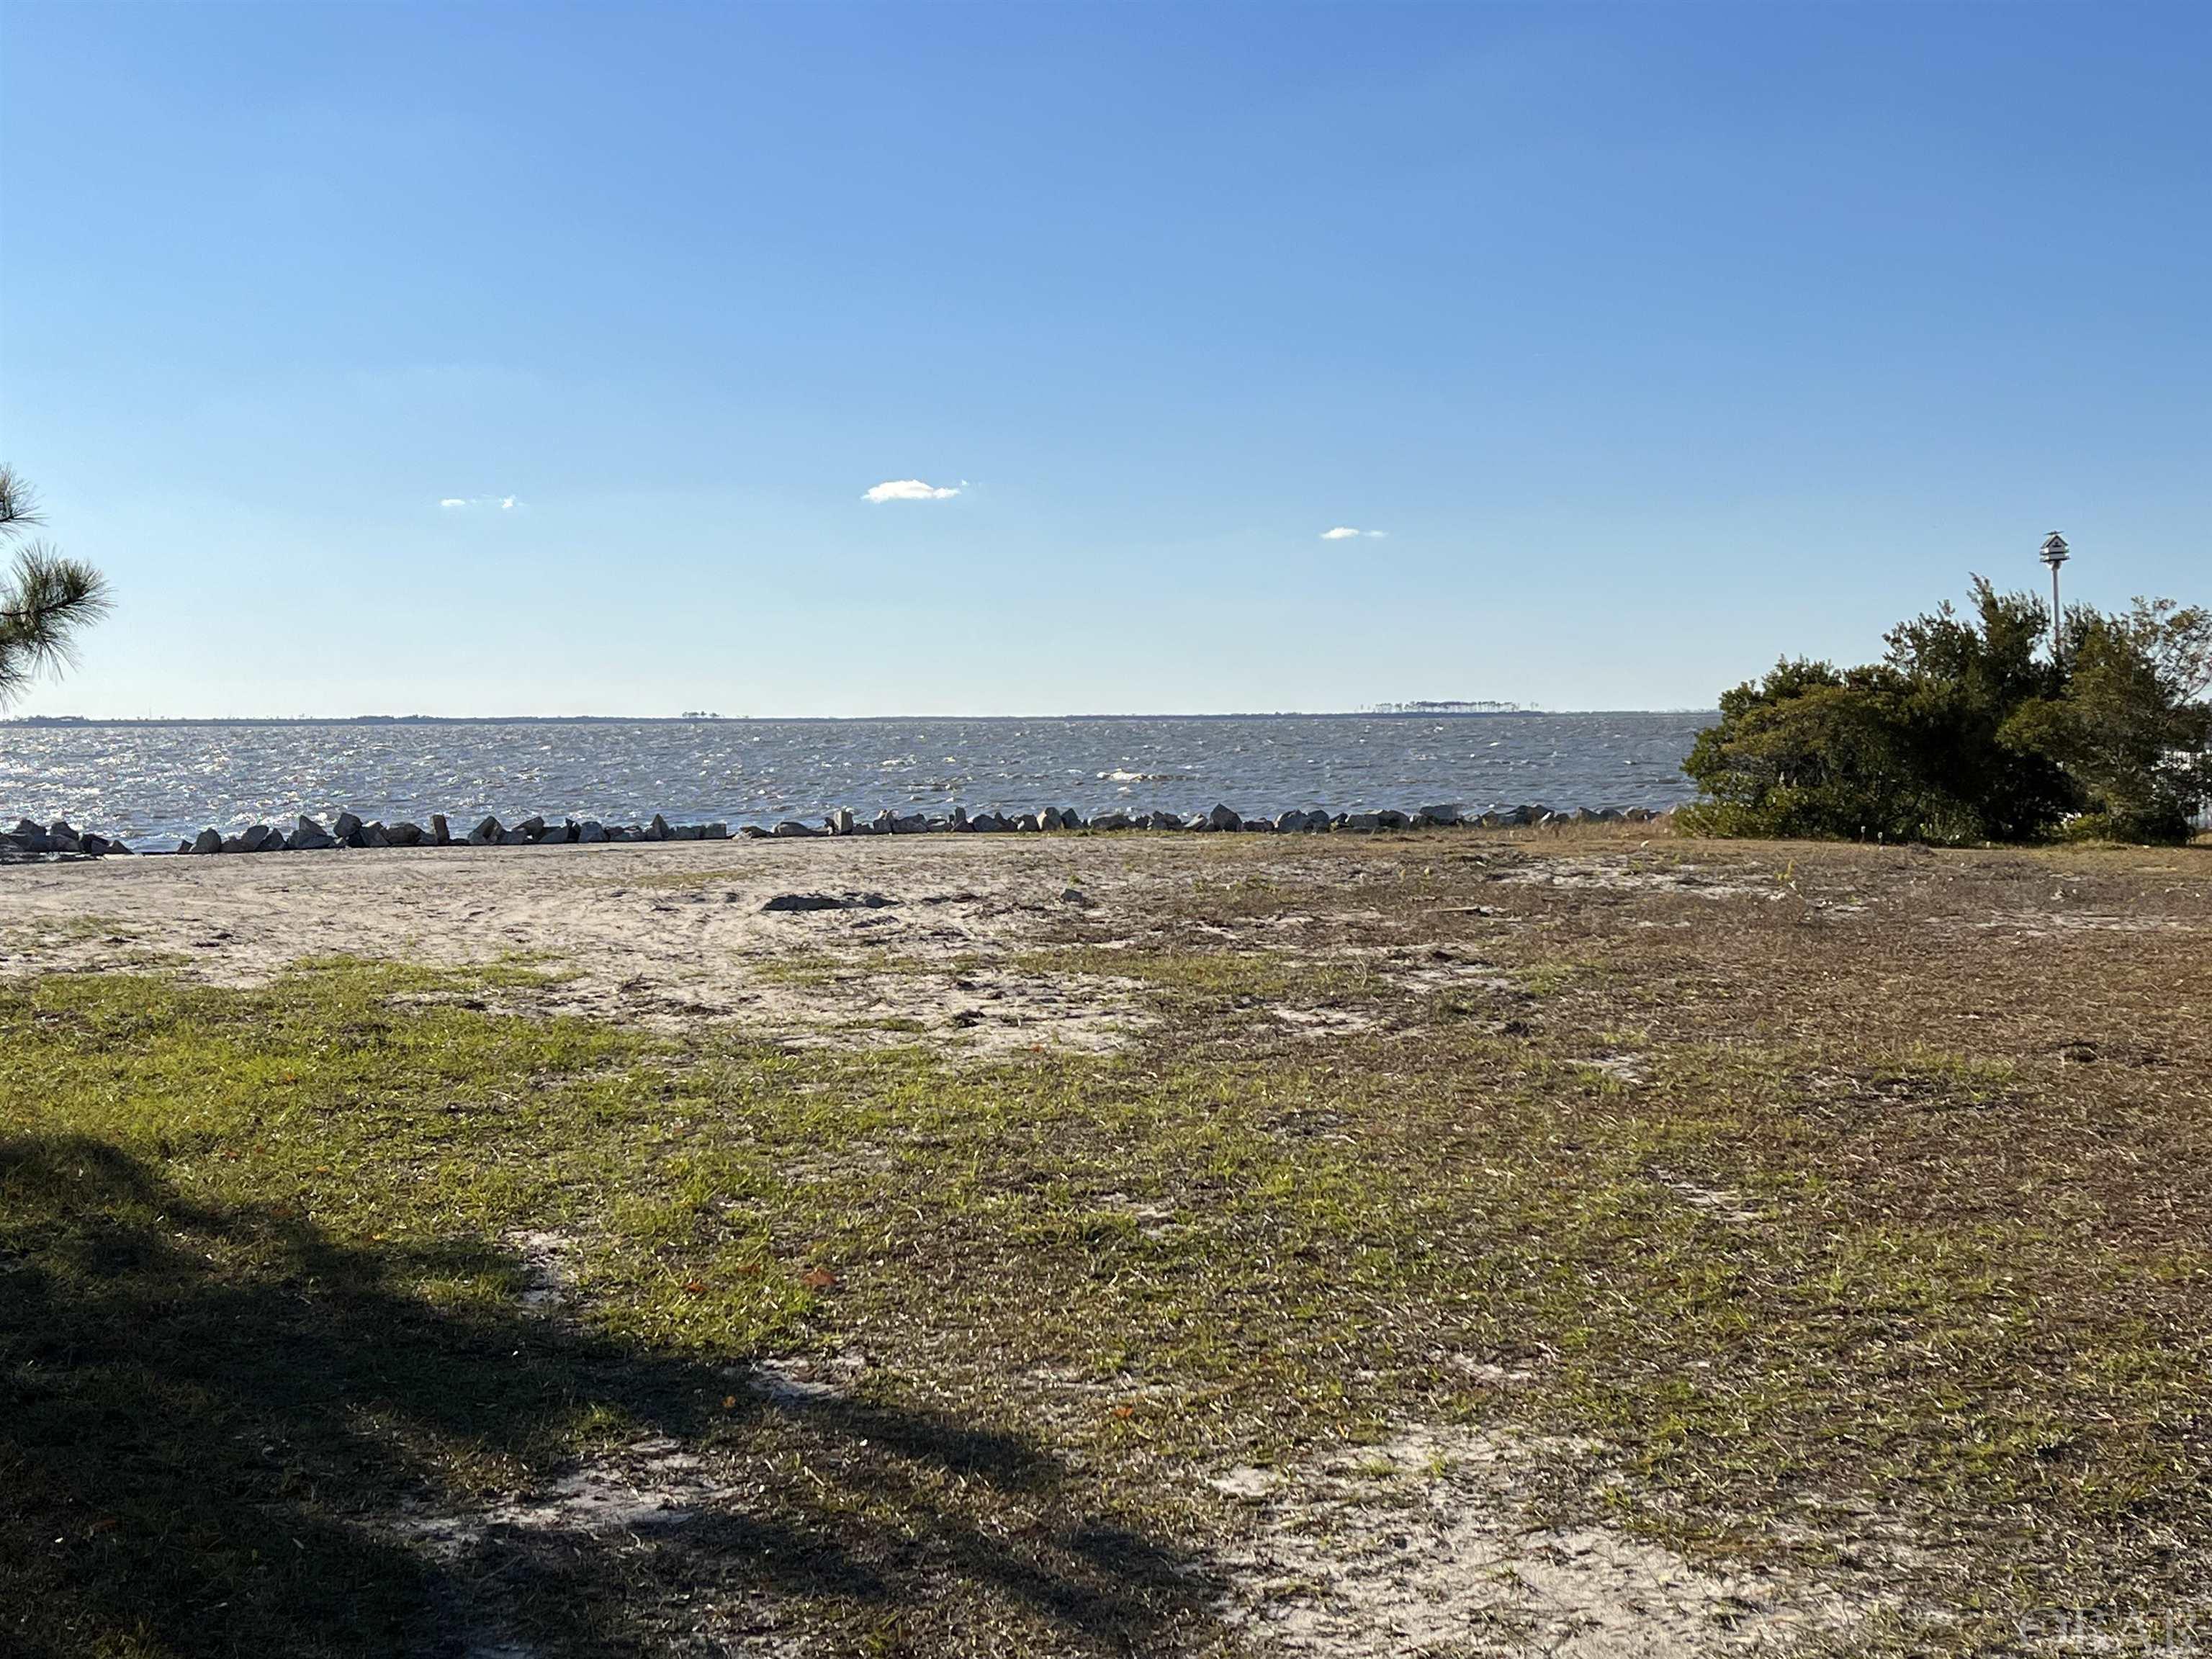 SOUNDFRONT homestead site with panoramic views of the Croatan and Albemarle Sound in exclusive boating community of Heritage Point! Amenities include a boat slip for easy access to the sound, a private sandy beach for your family to enjoy as well as a sound front pier. Watch evening sunsets at the large neighborhood gazebo or right in your backyard. The seller has just completed work on the bulkhead. There is also a boat ramp and a boat house with some exercise equipment. This is the PERFECT homesite and last sound front lot in Heritage Point for your DREAM location on Roanoke Island close to the town of Manteo, Lost Colony, Elizabethan Gardens, North Carolina Aquarium, and Festival Park! All this and OUTER BANKS BEACH is a short drive away!